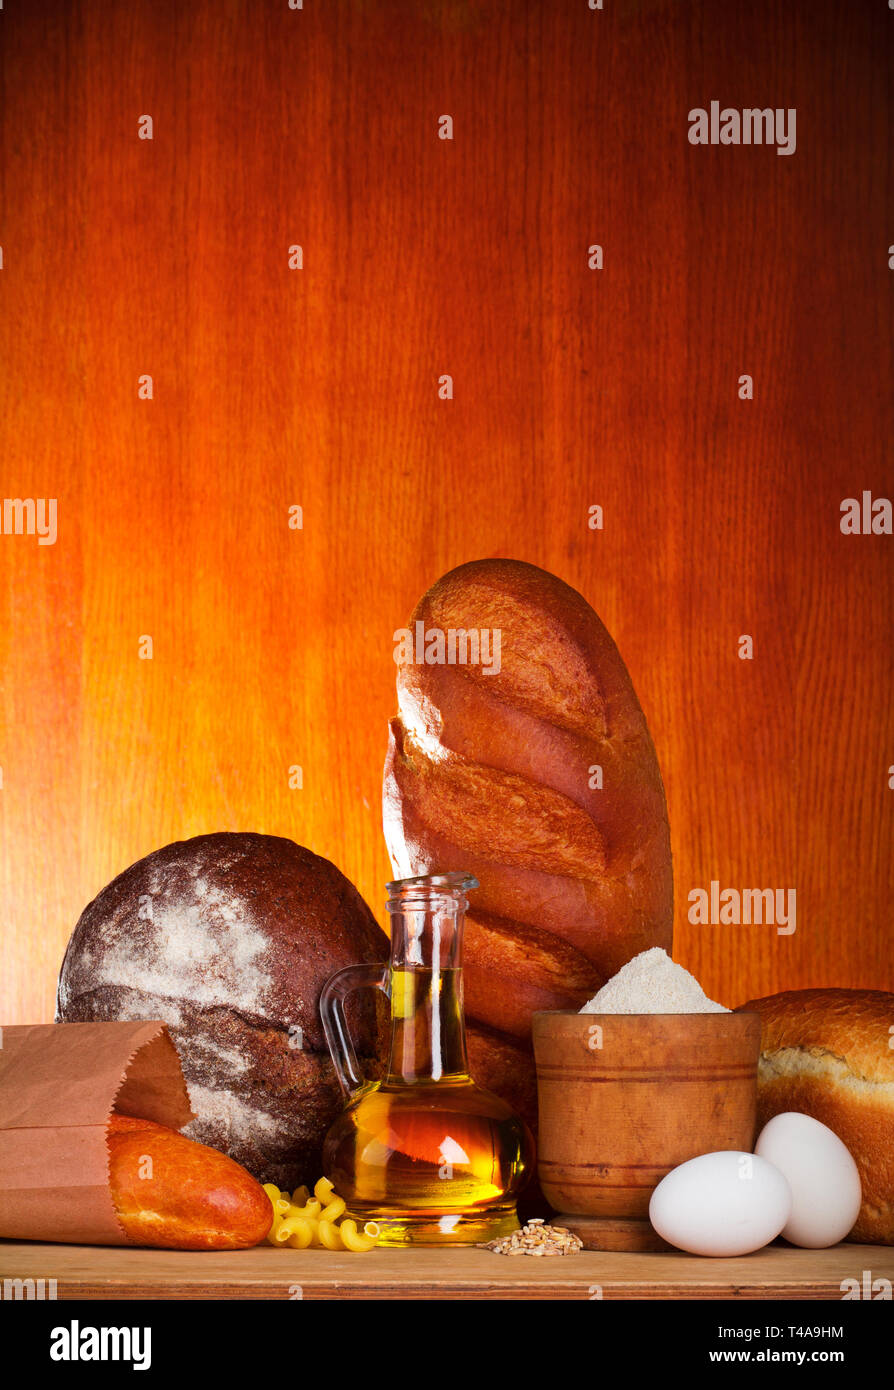 Bread assortment with baking ingredients Stock Photo